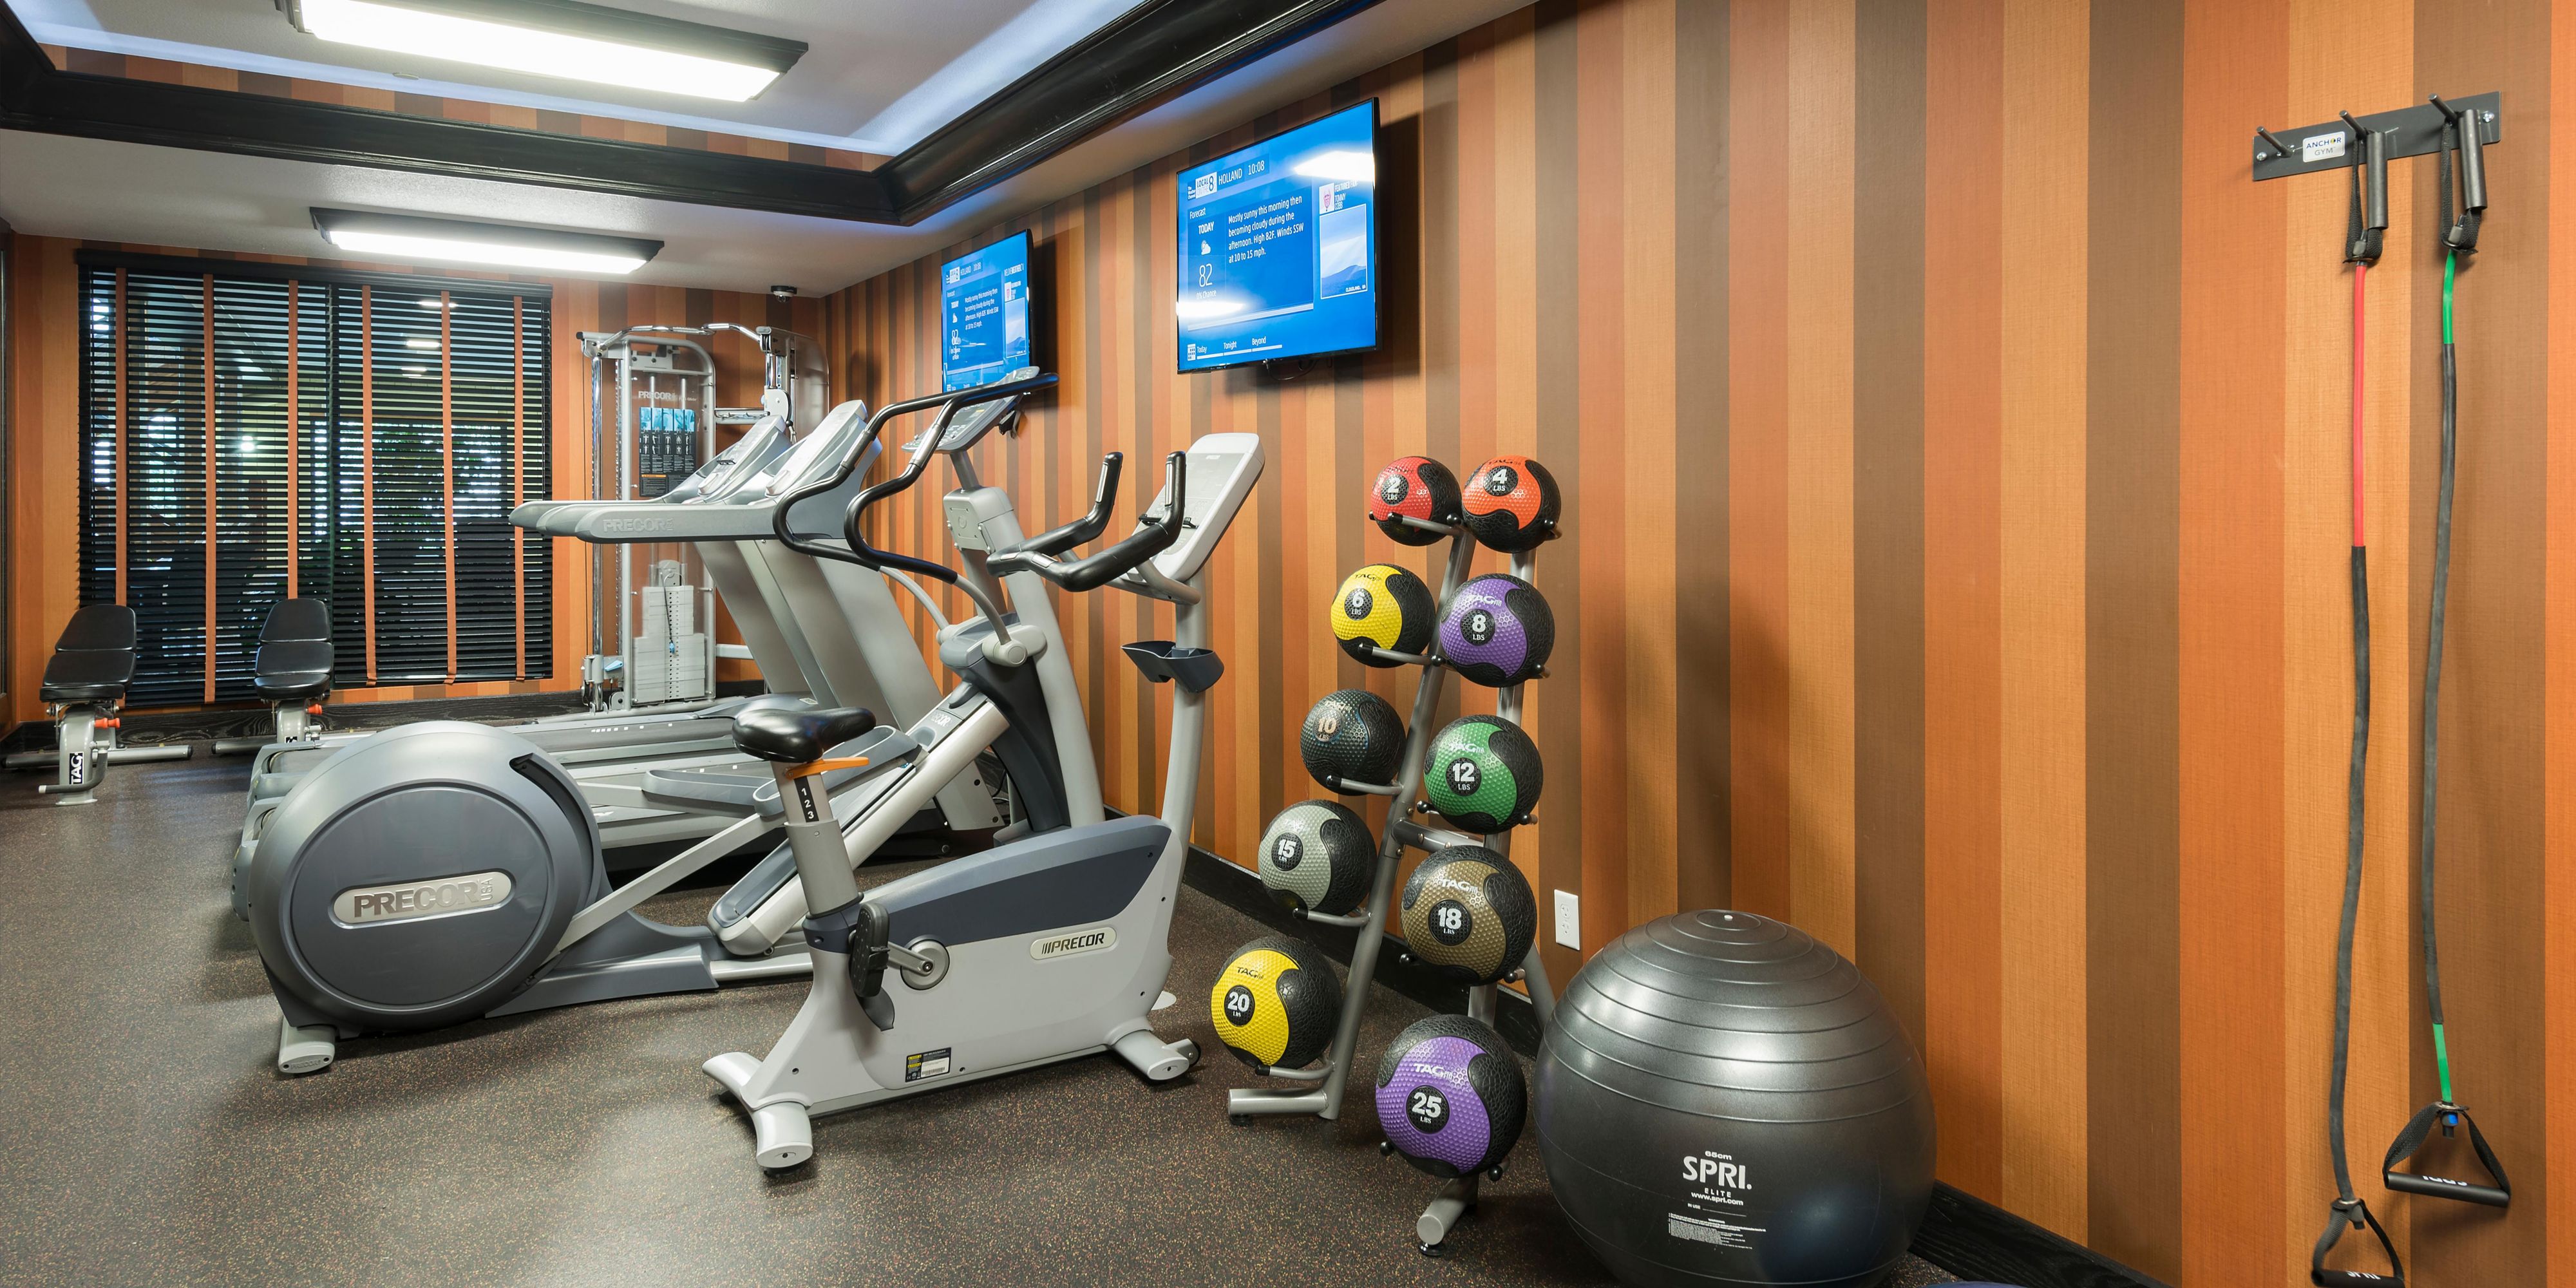 Work out whenever you want. Our on-property fitness center has an open door and is available 24 hours. The variety of equipment will make it easier for you to stick to your fitness routine - no sweat.